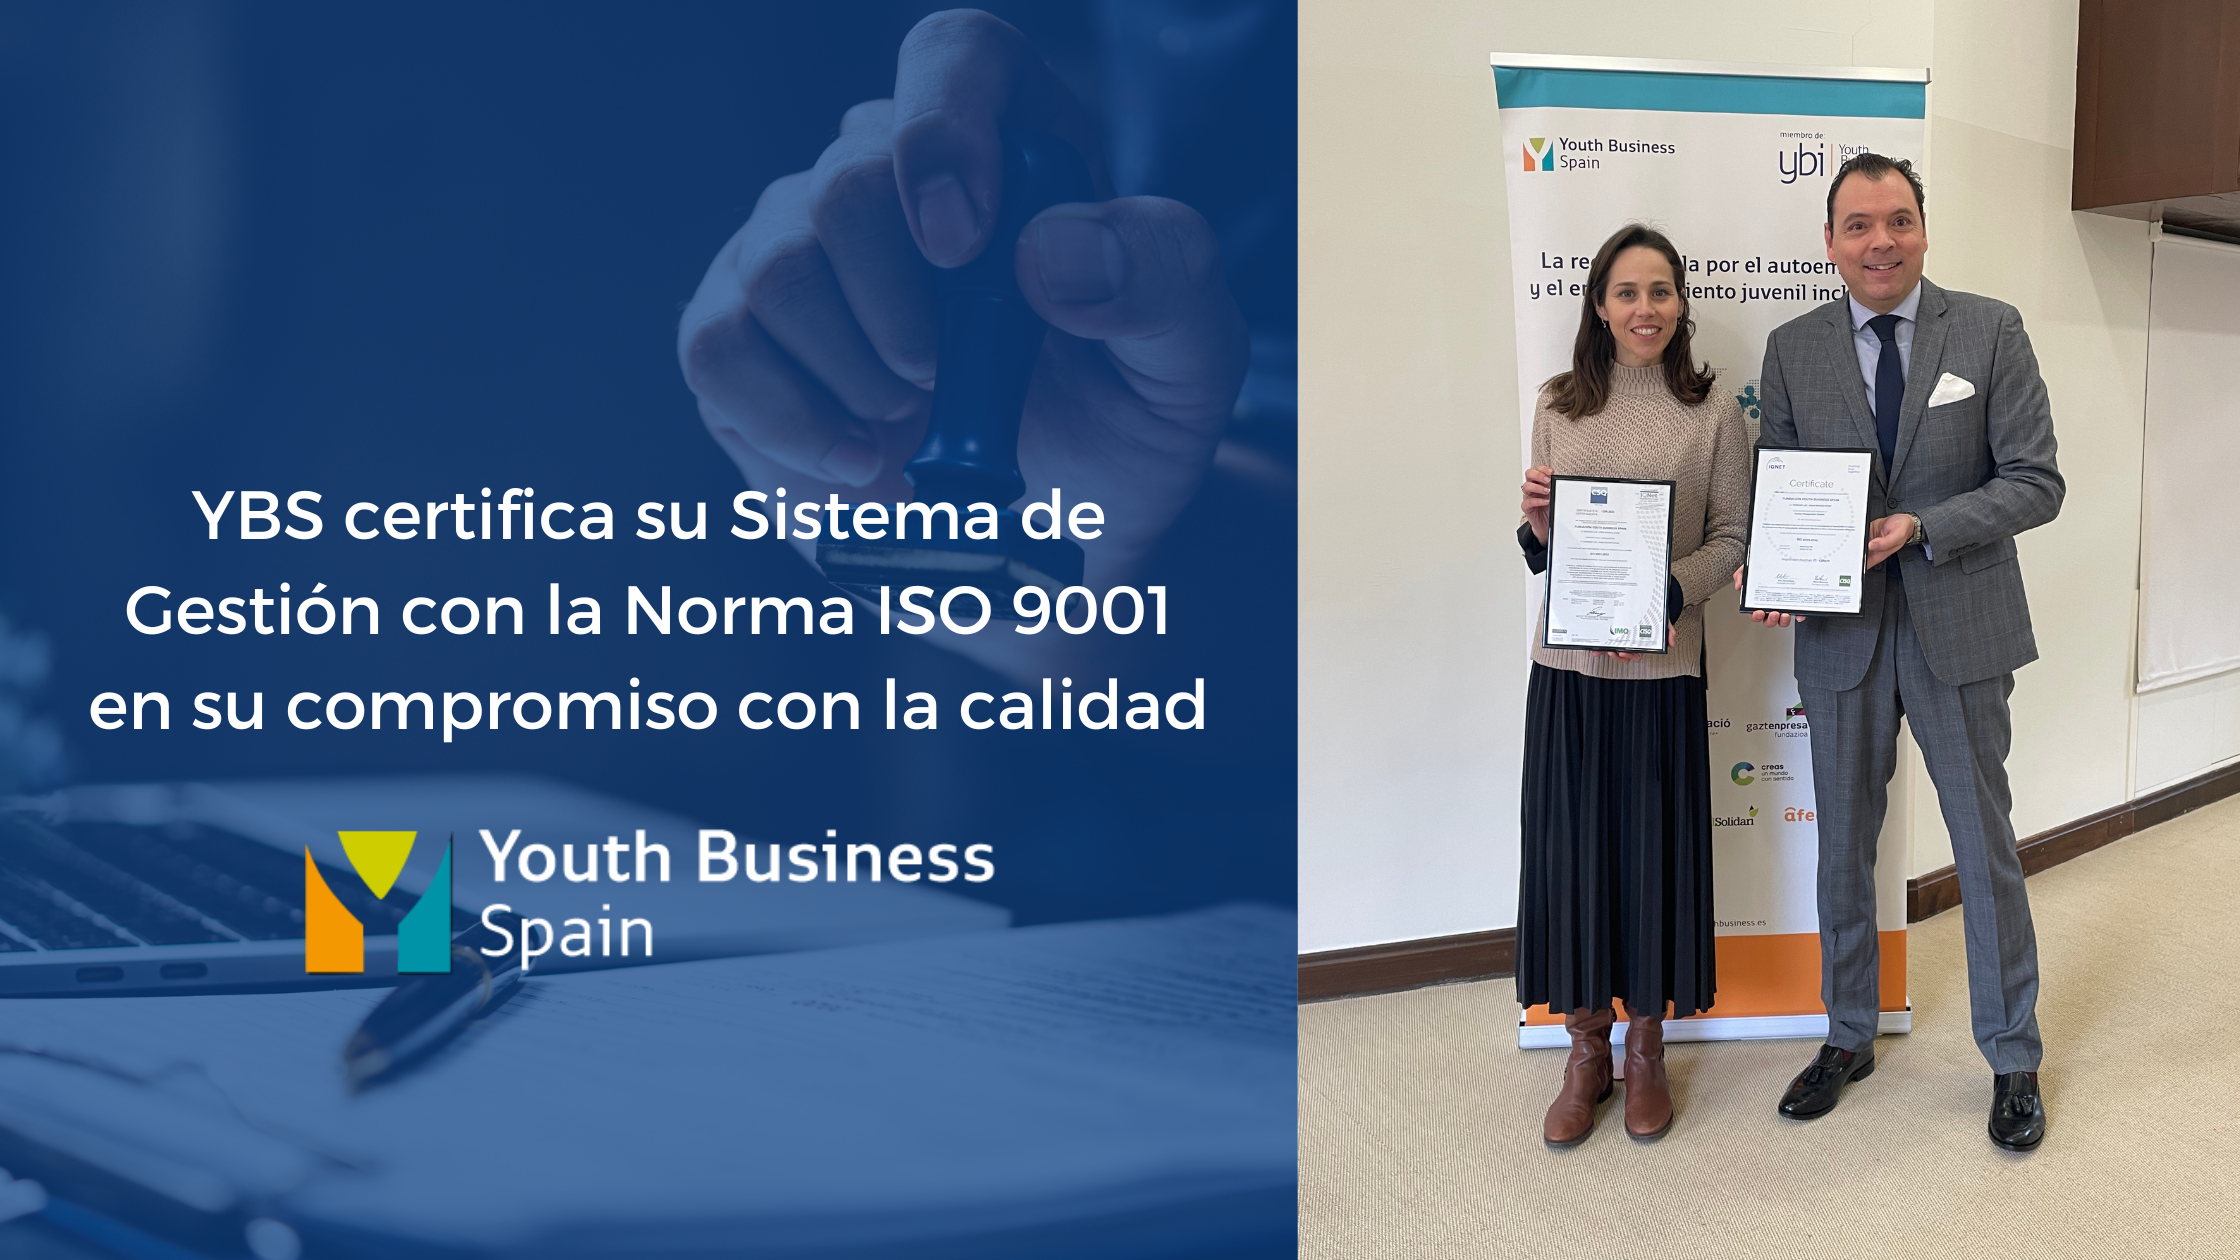 norma ISO 9001:2015